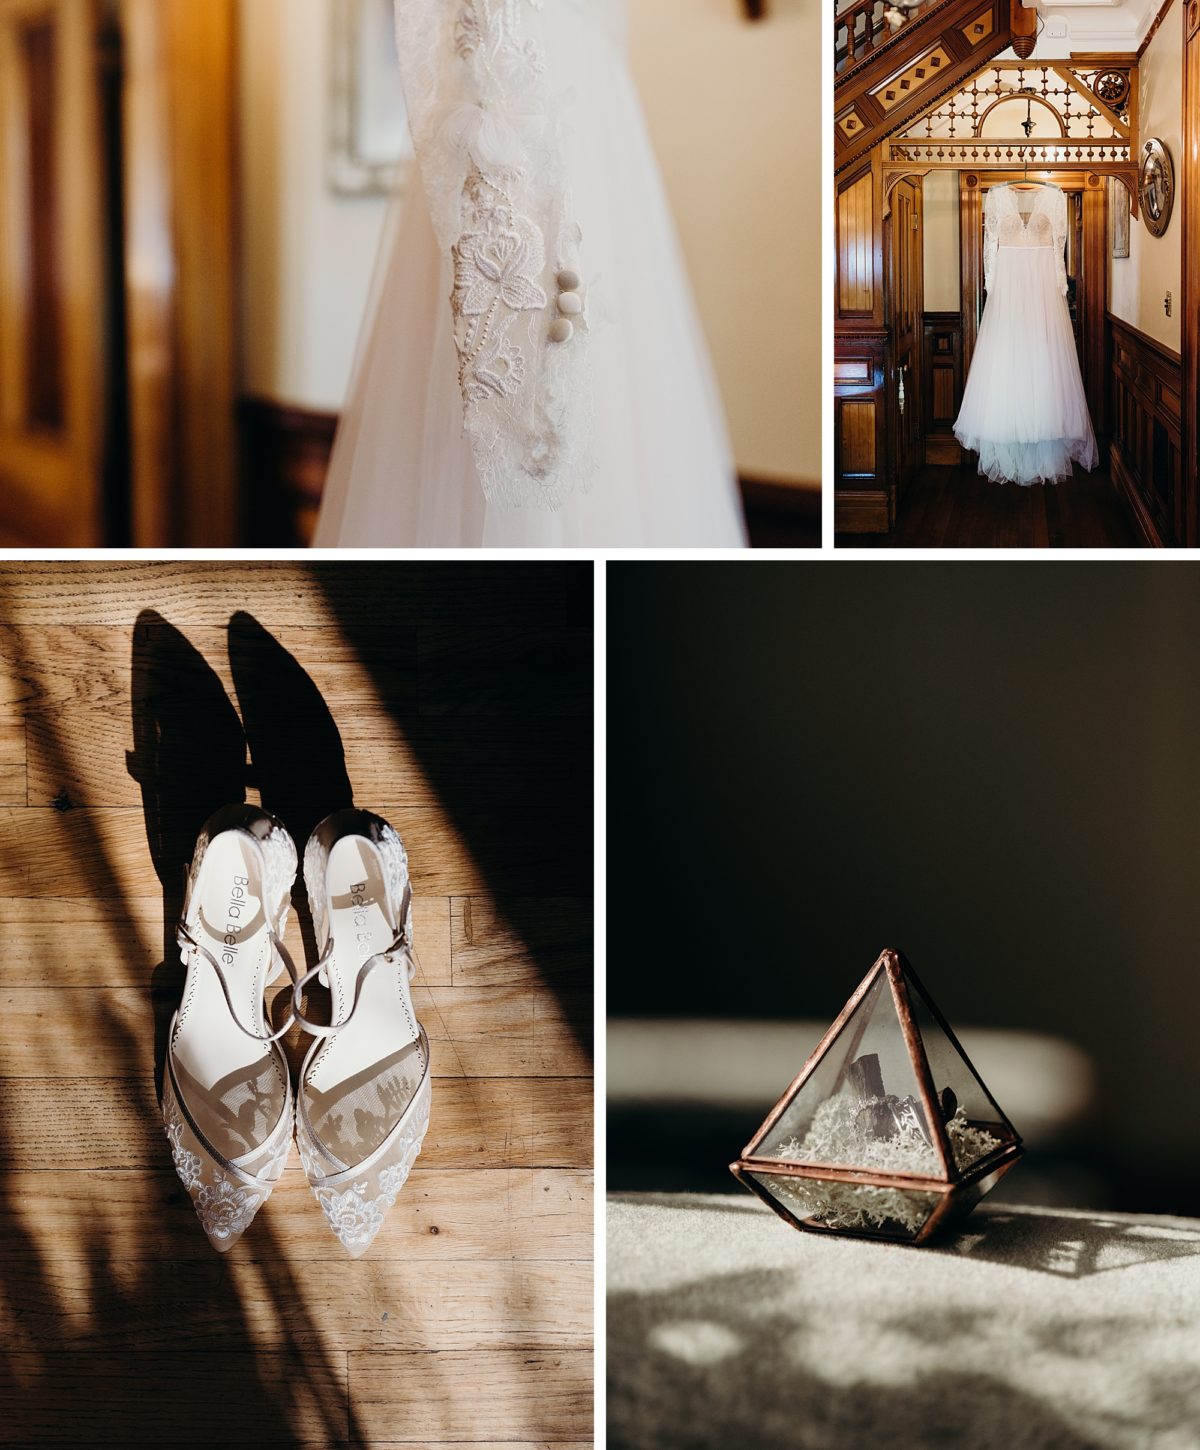 Wedding dress, shoe, and ring details. Photographed by Portland Wedding Photographer, Briana Morrison